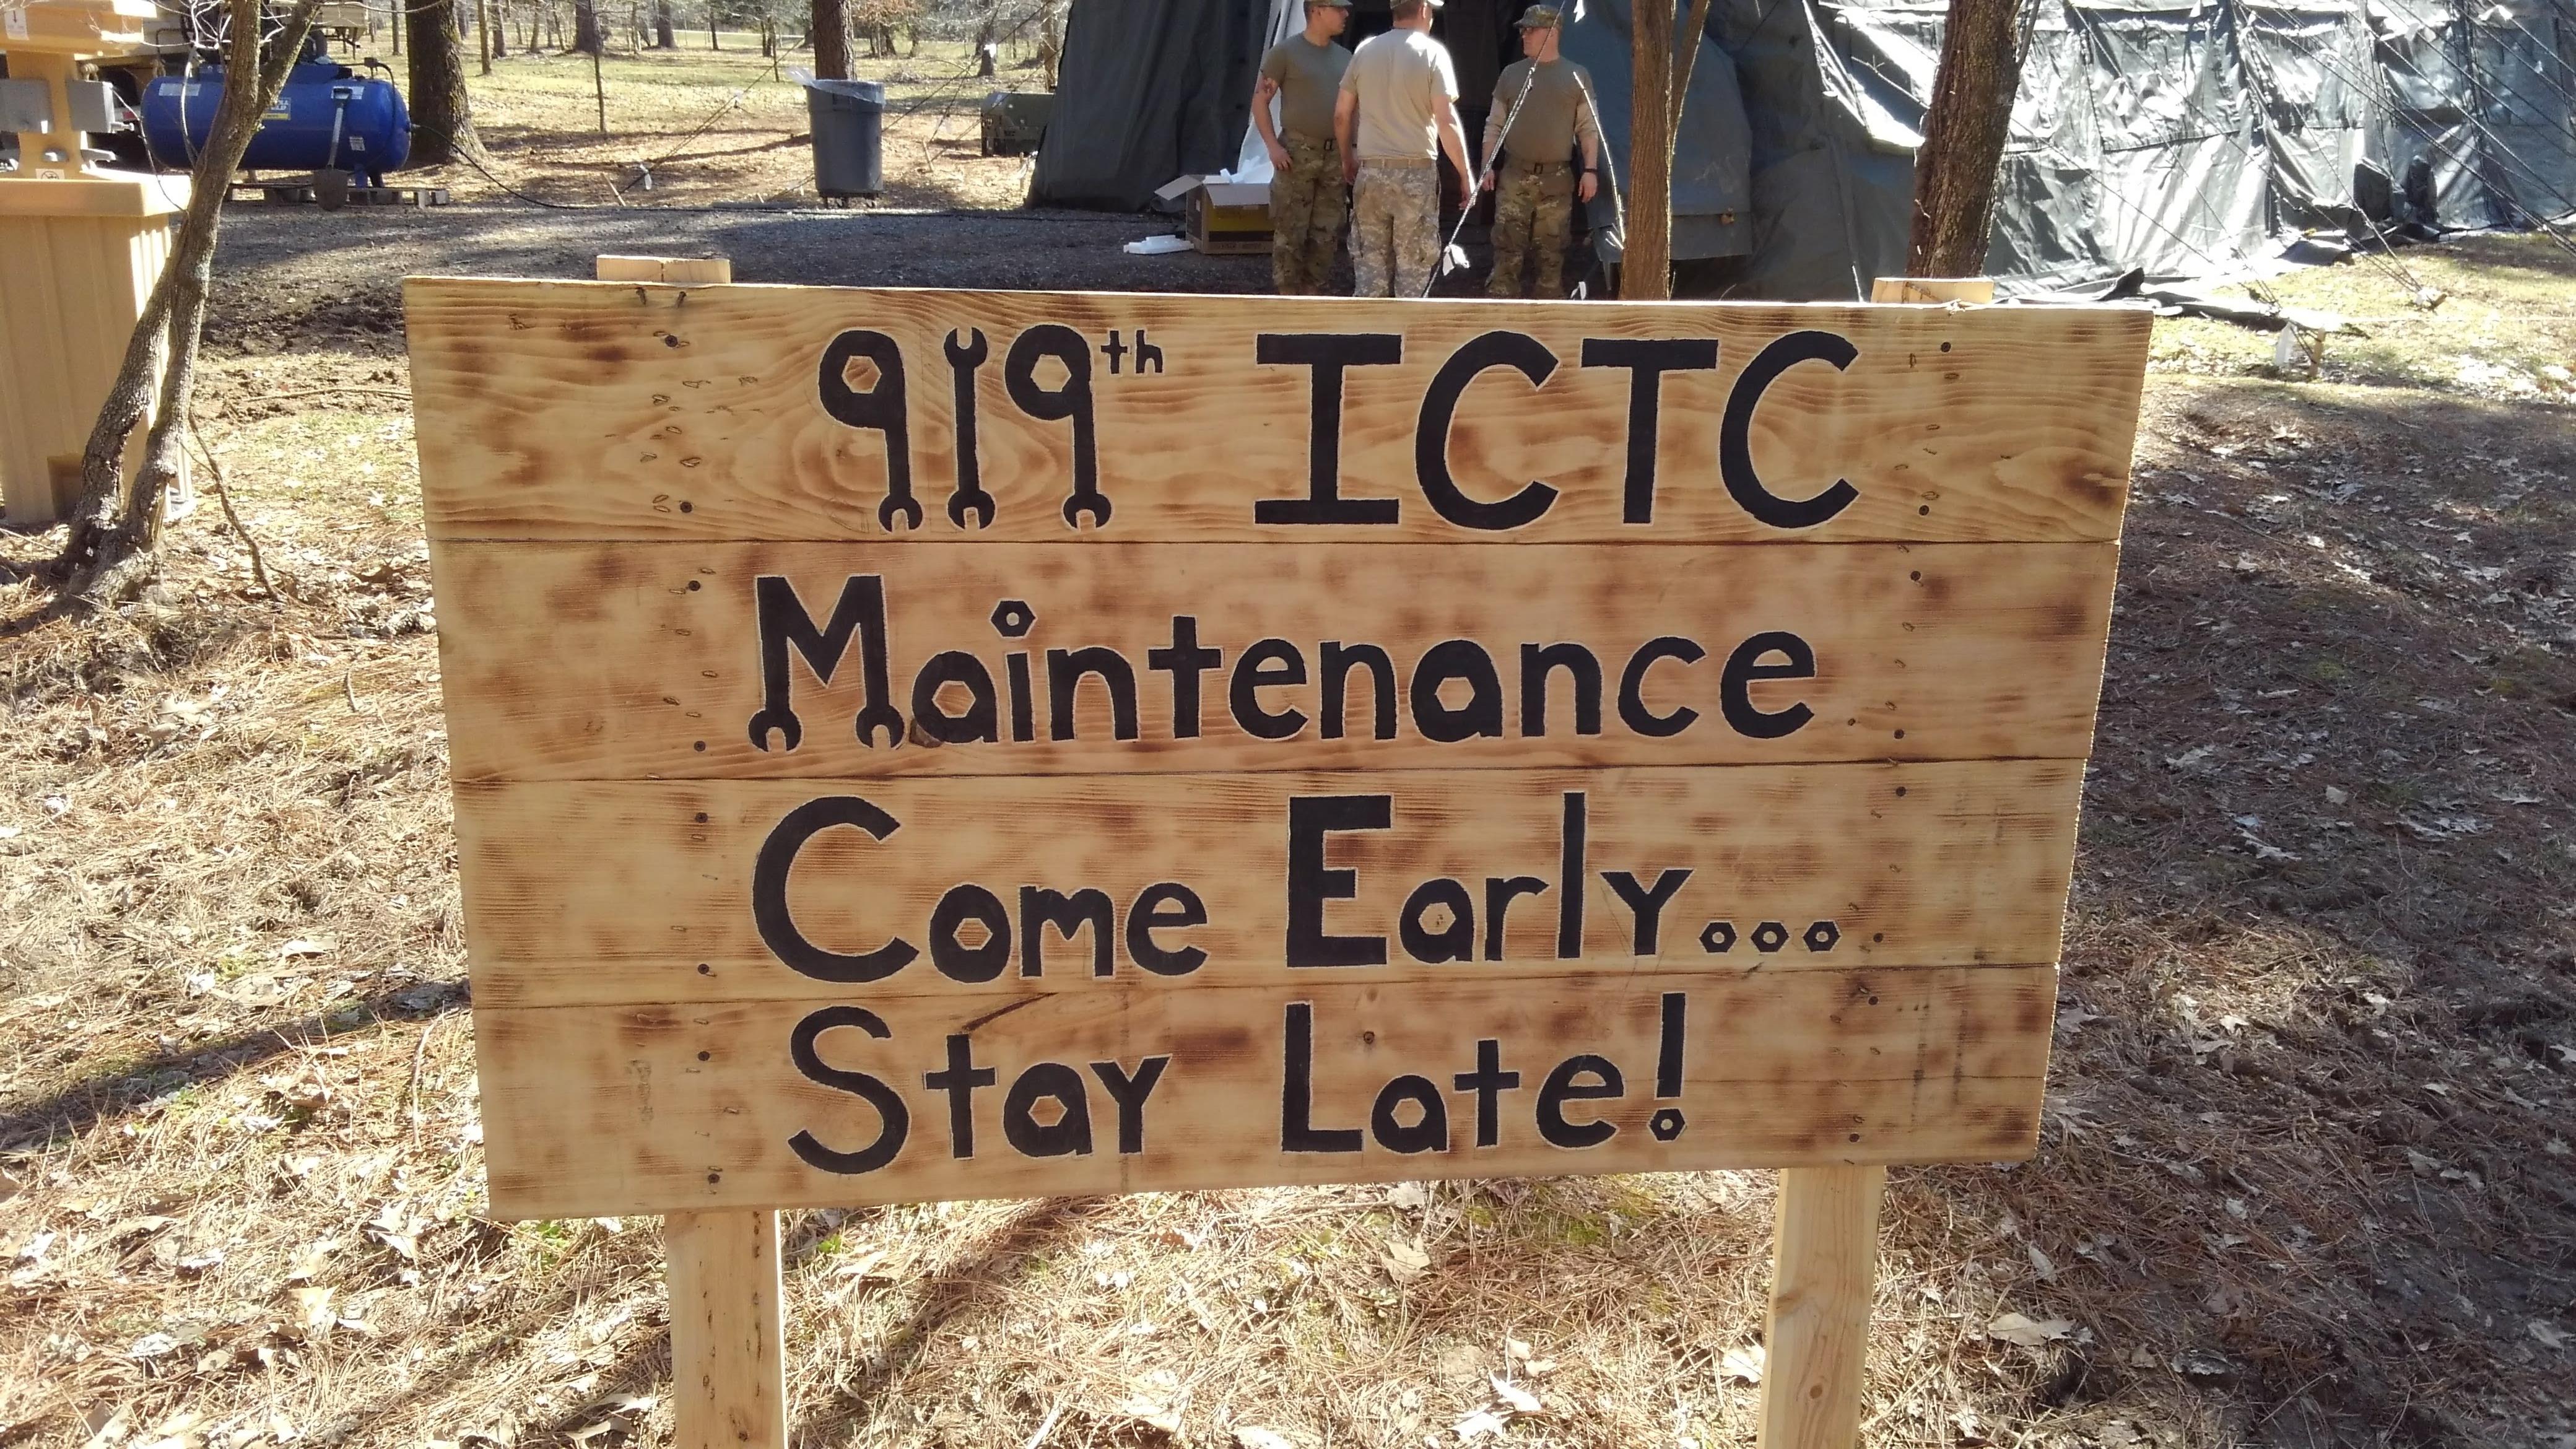 919 ICTC Maintenance Come Early Stay Late